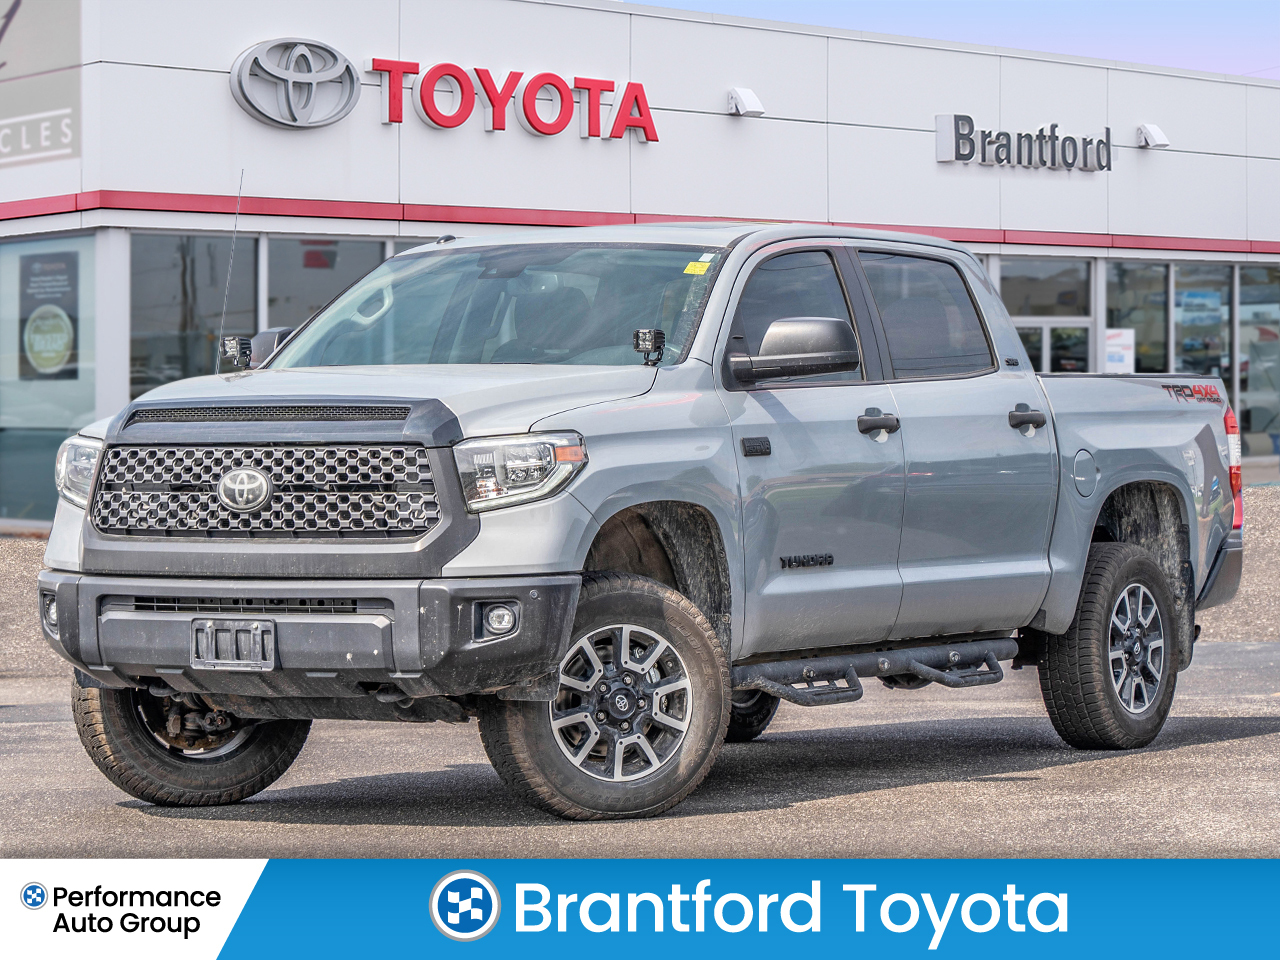 2018 Toyota Tundra TRD OFF ROAD PACKAGE - FREE TONNEAU AND SIDE STEPS